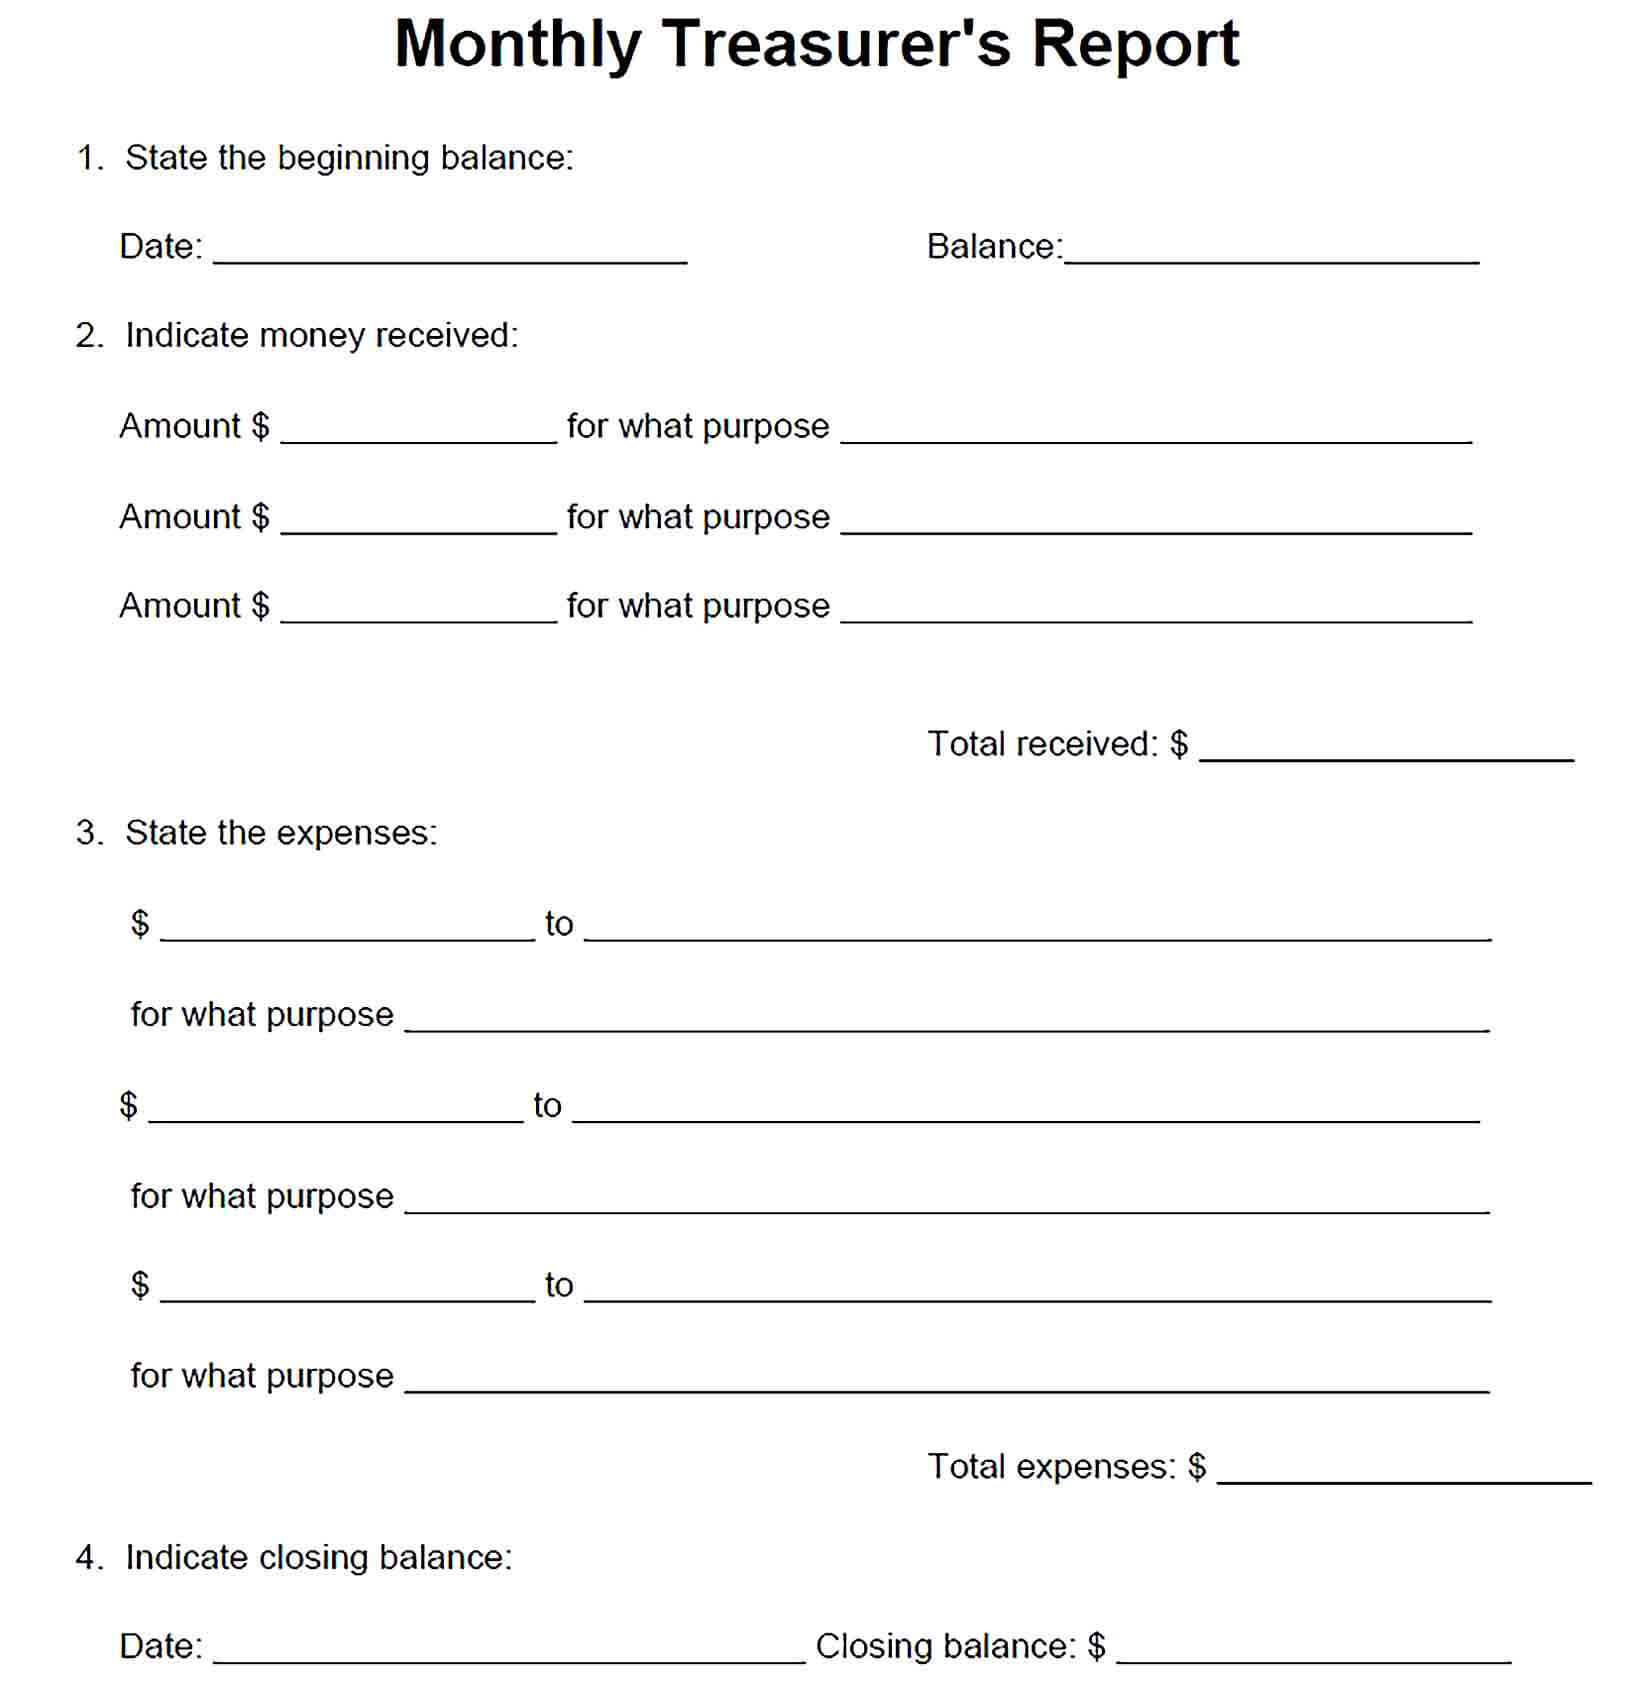 Sample Clubs Monthly Treasurers Report PDF Template